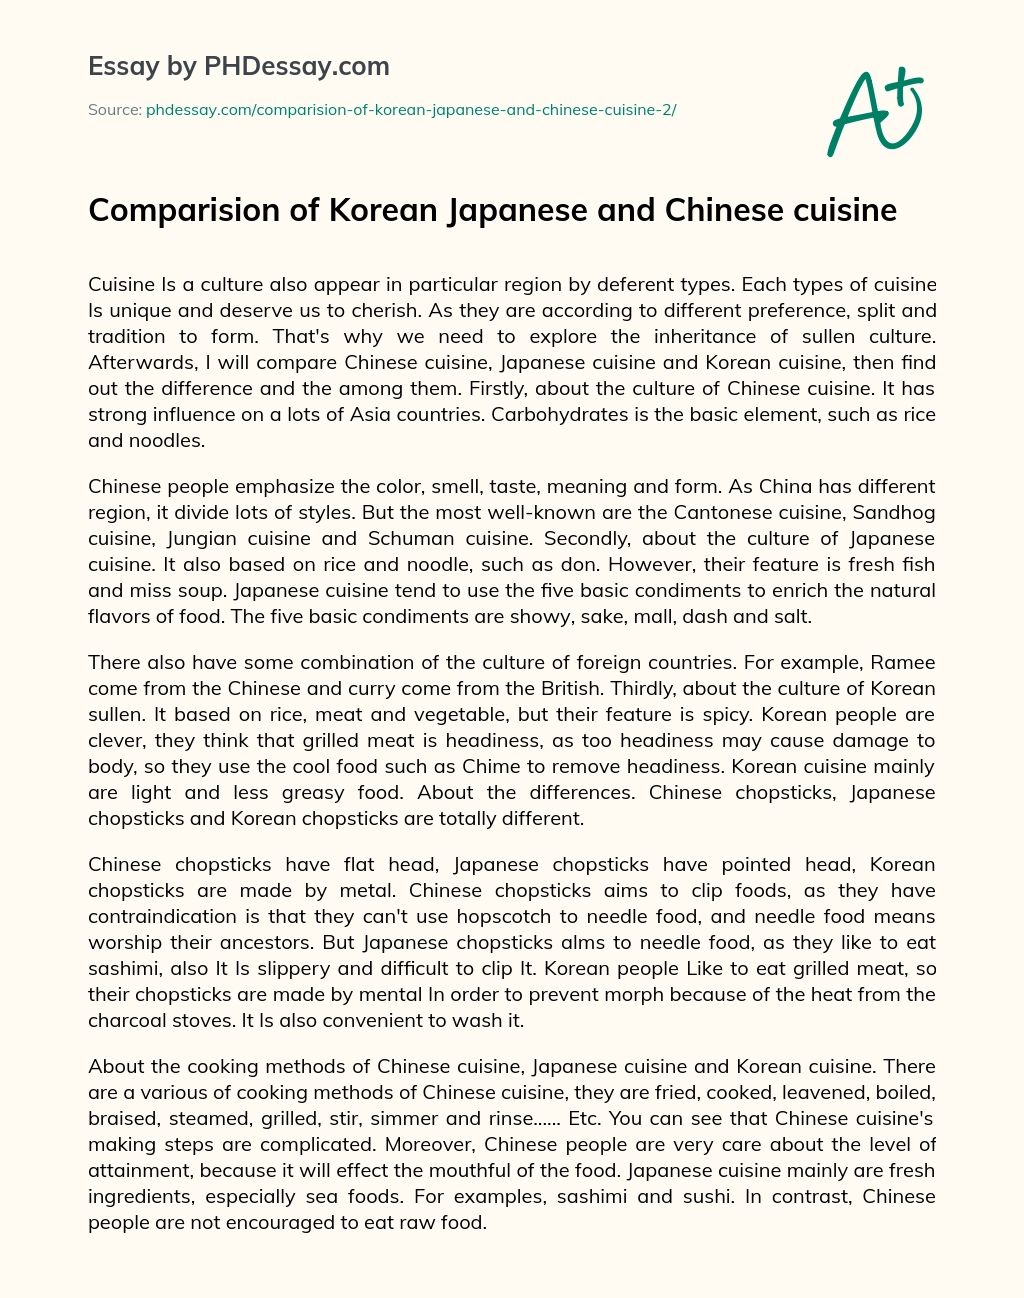 Comparison of Korean, Japanese and Chinese cuisine essay